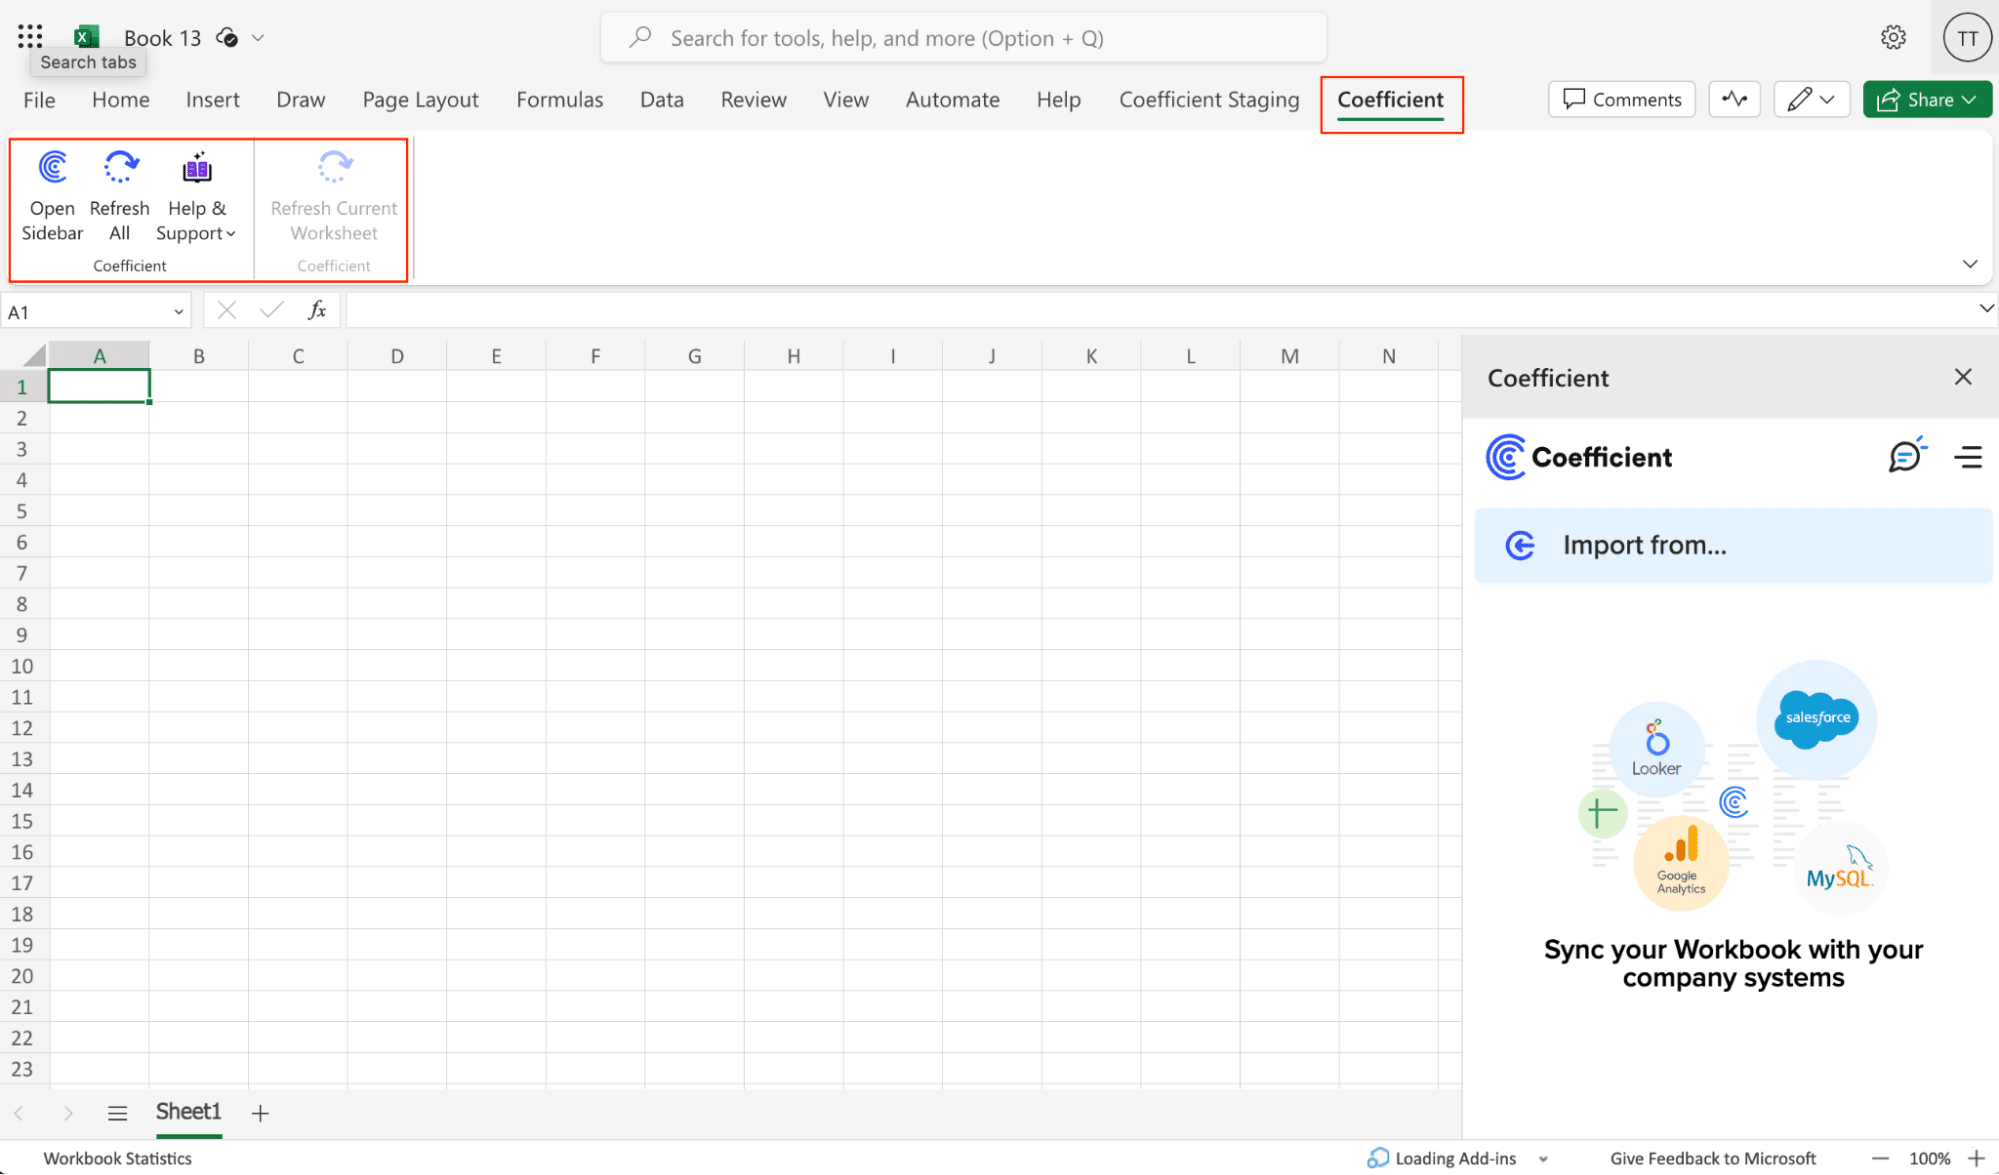 The Excel menu with Coefficient now listed under My Add-ins.